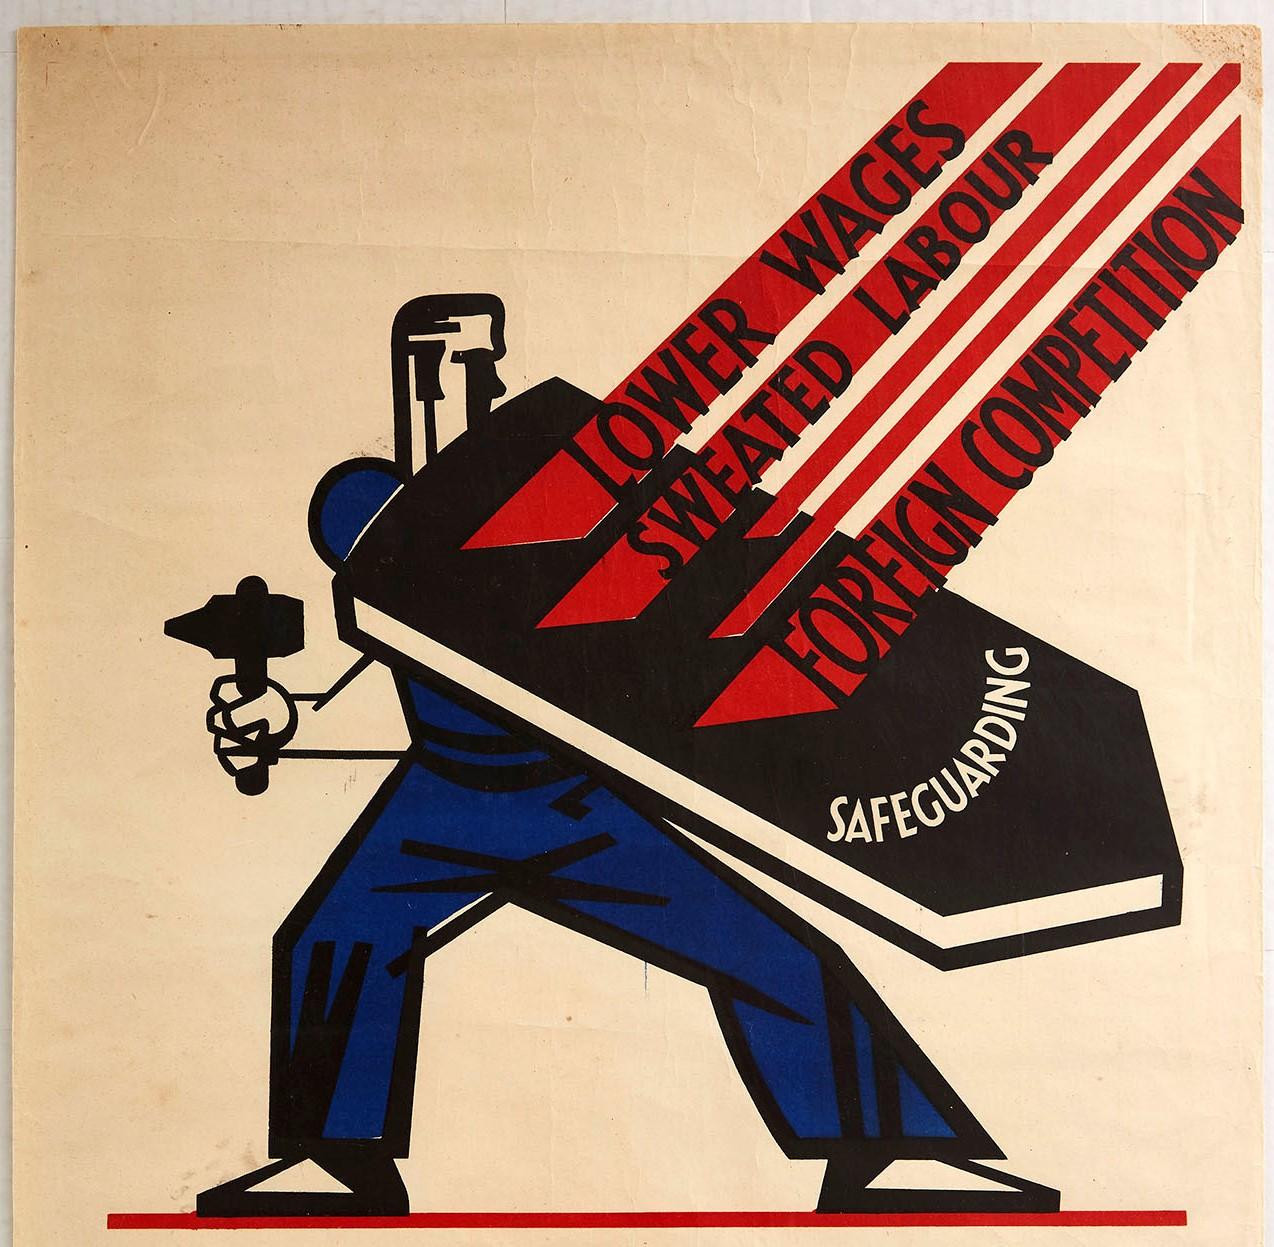 Original vintage British election propaganda poster, Safeguarding Shields Your Wages & Your Job! Workers! Vote Conservative!, featuring a dynamic modernist design depicting a worker holding a hand tool in one hand and a shield marked Safeguarding in